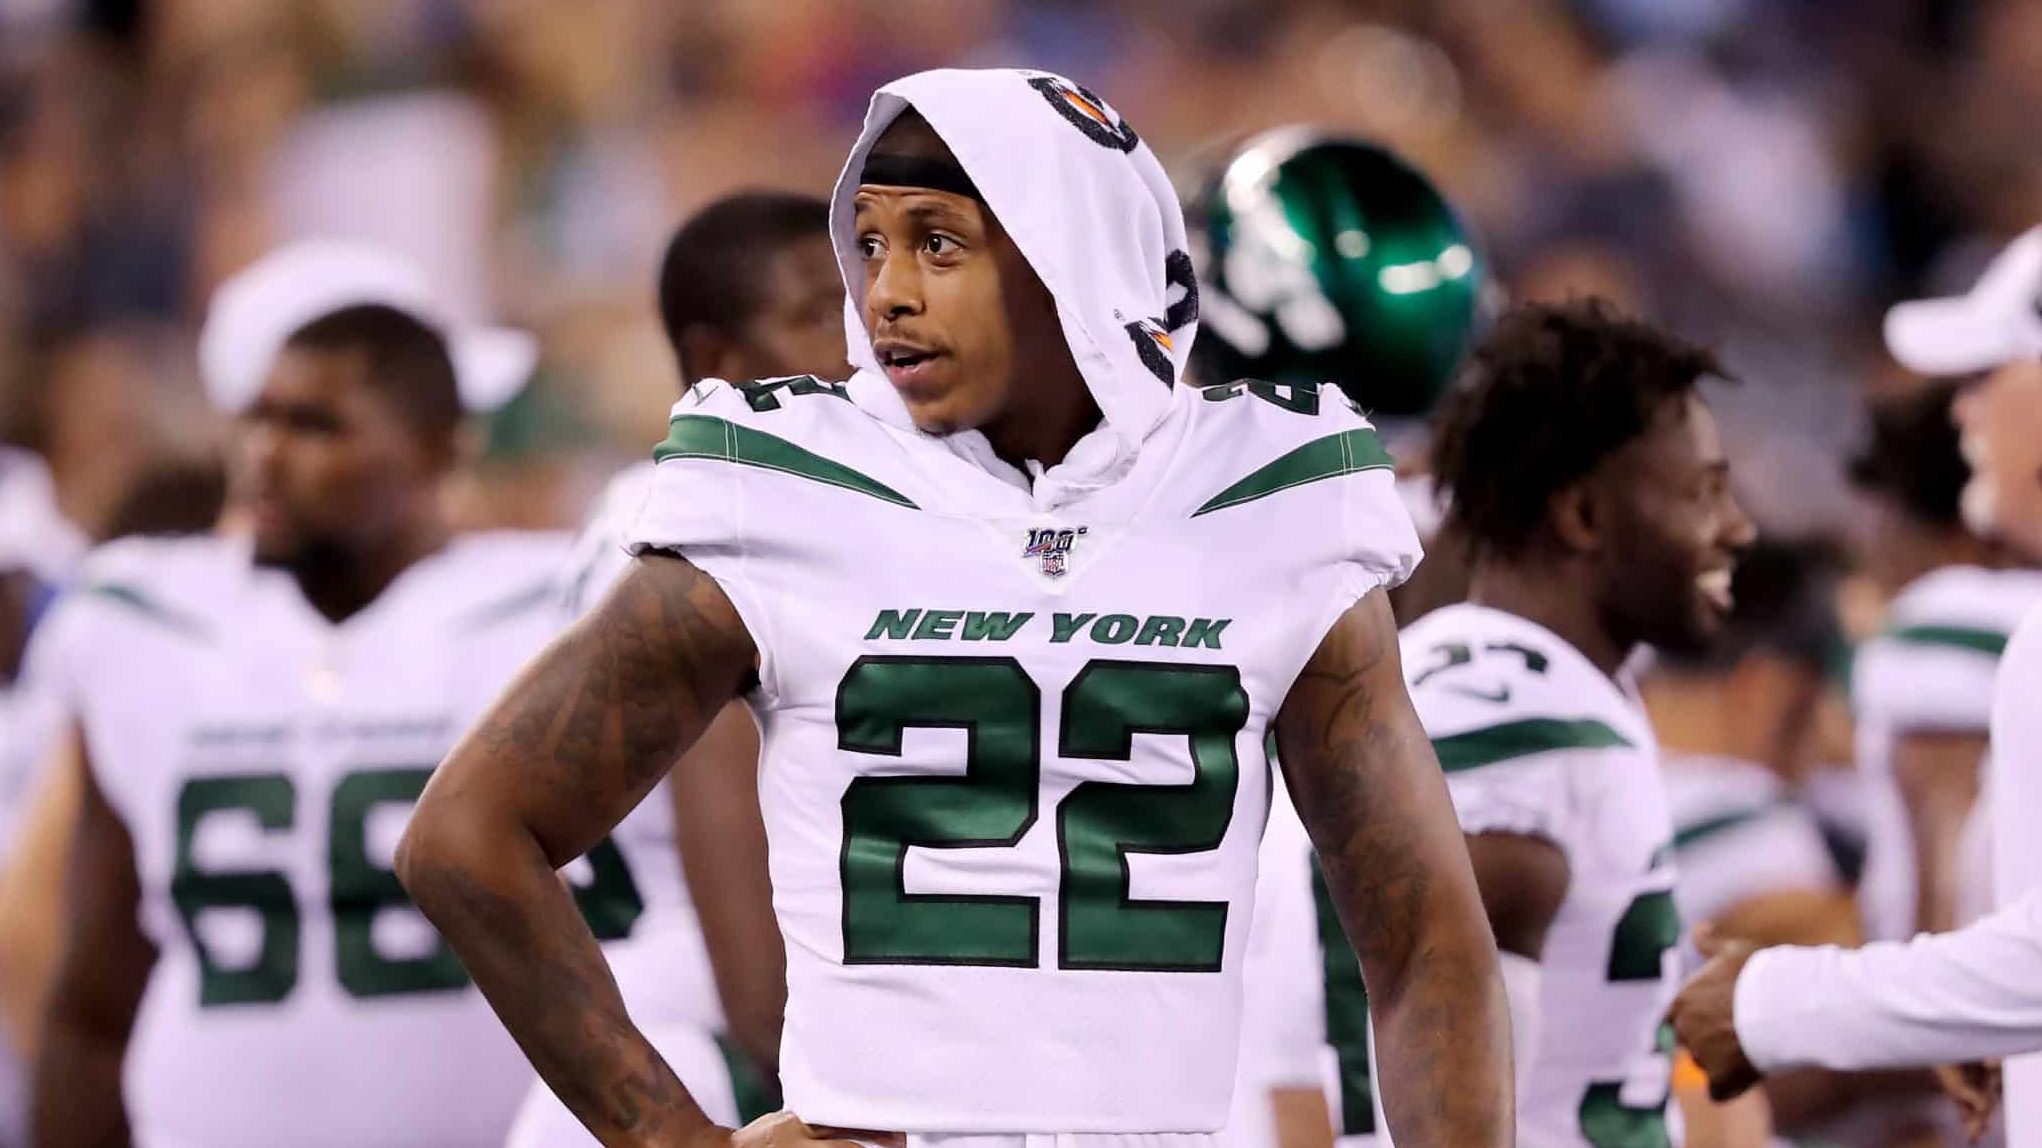 EAST RUTHERFORD, NEW JERSEY - AUGUST 08: Trumaine Johnson #22 of the New York Jets looks on from the sideline during a preseason game against the New York Giants at MetLife Stadium on August 08, 2019 in East Rutherford, New Jersey.